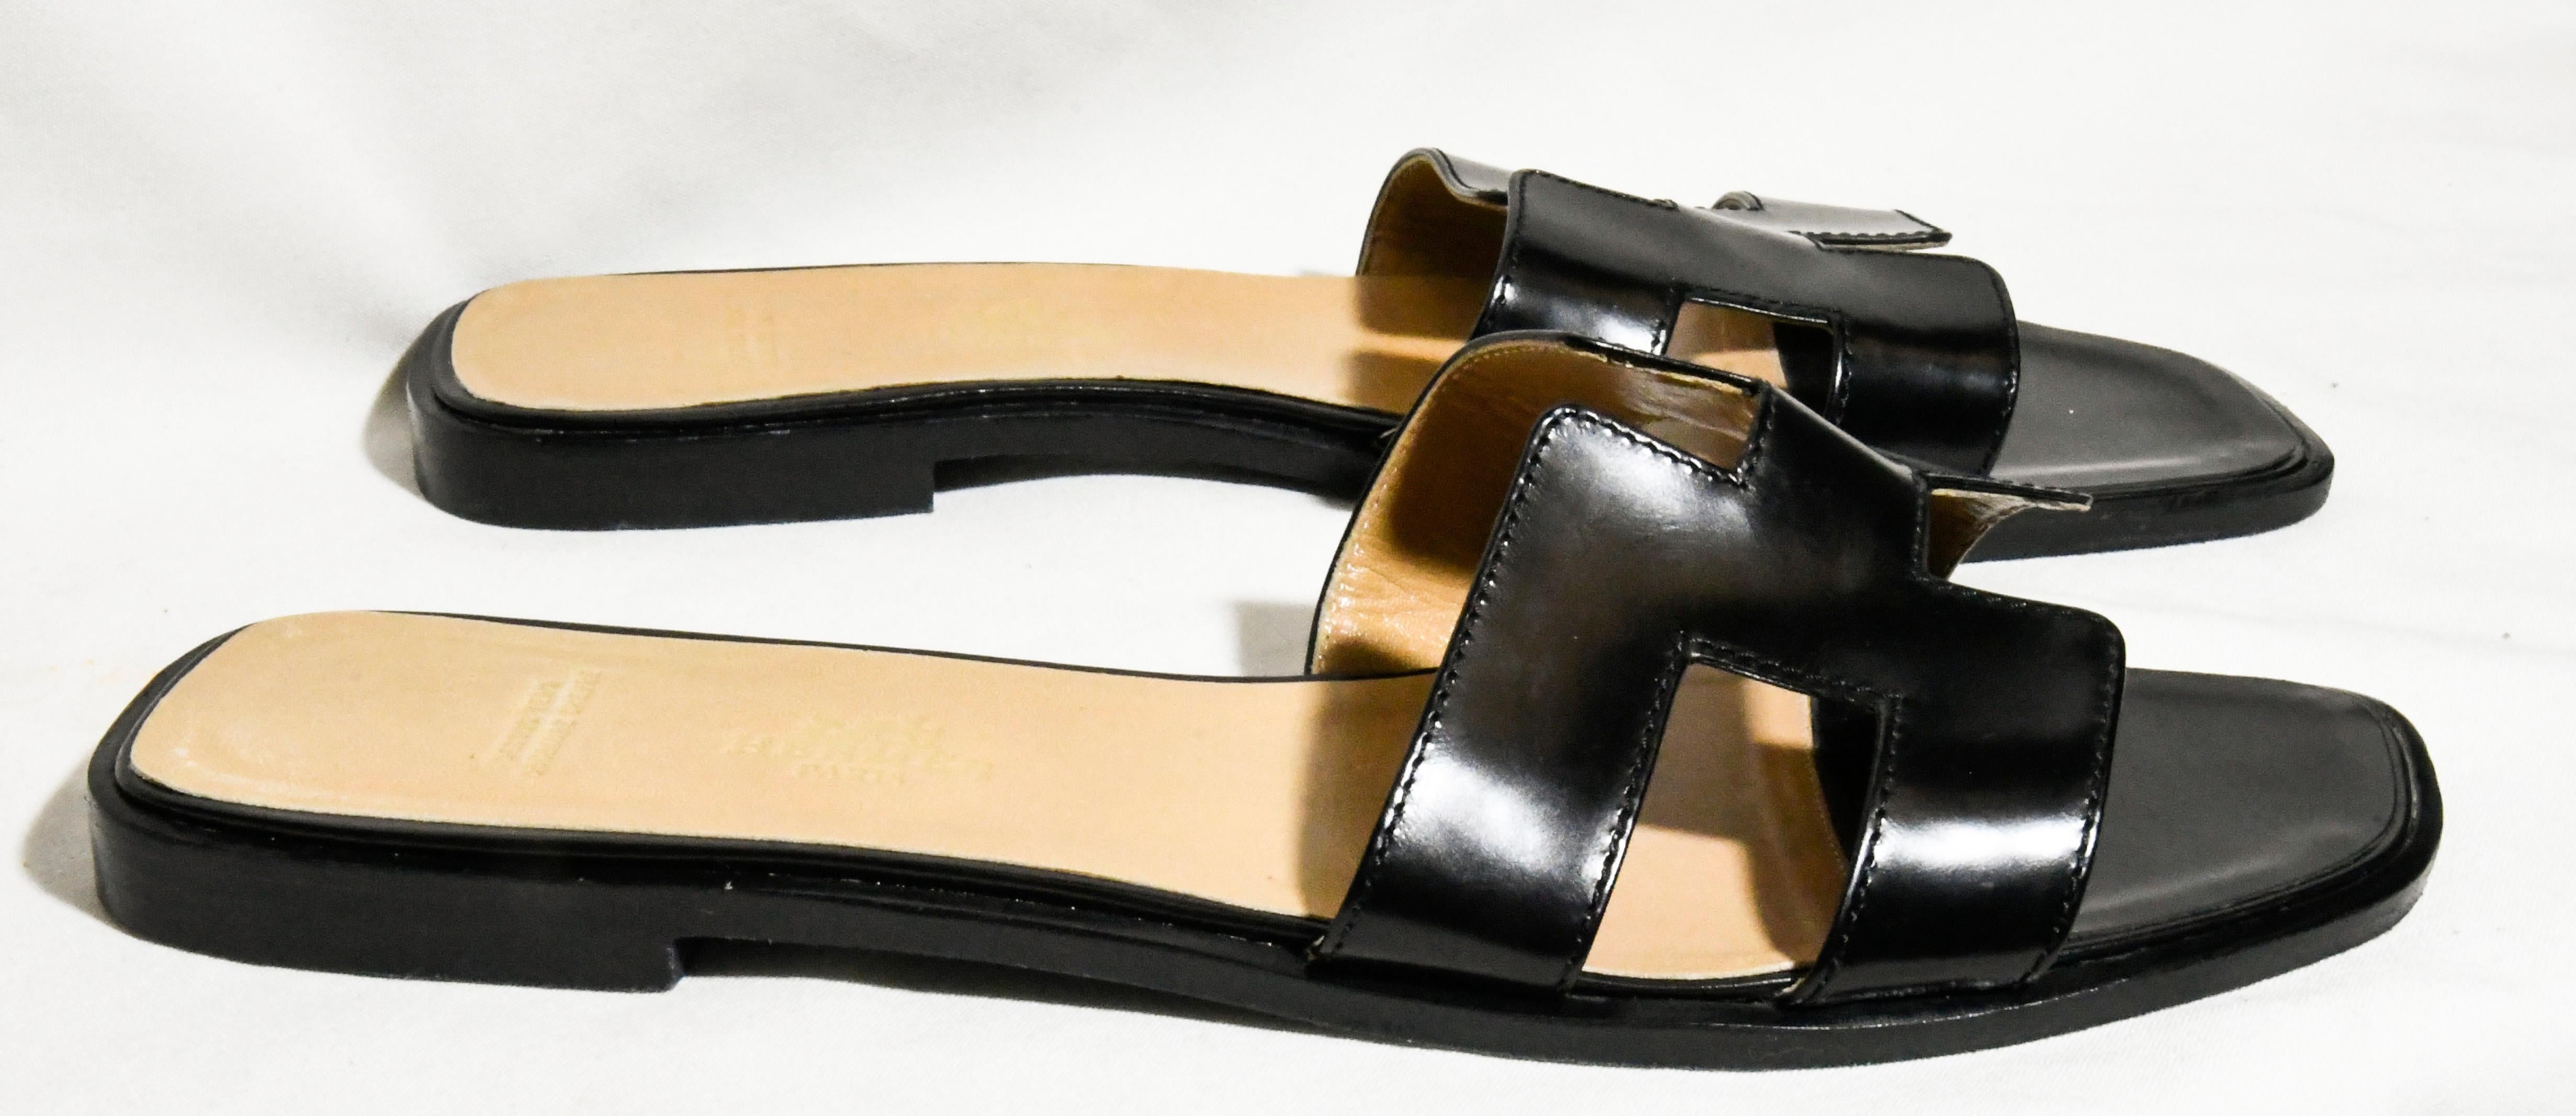 Hermes stylish Oran sandals are crafted of smooth box calfskin leather in black with insoles of natural leather. The shoes feature an Hermes H crossover strap with black stitching.  Sandals in excellent condition.
Made in France